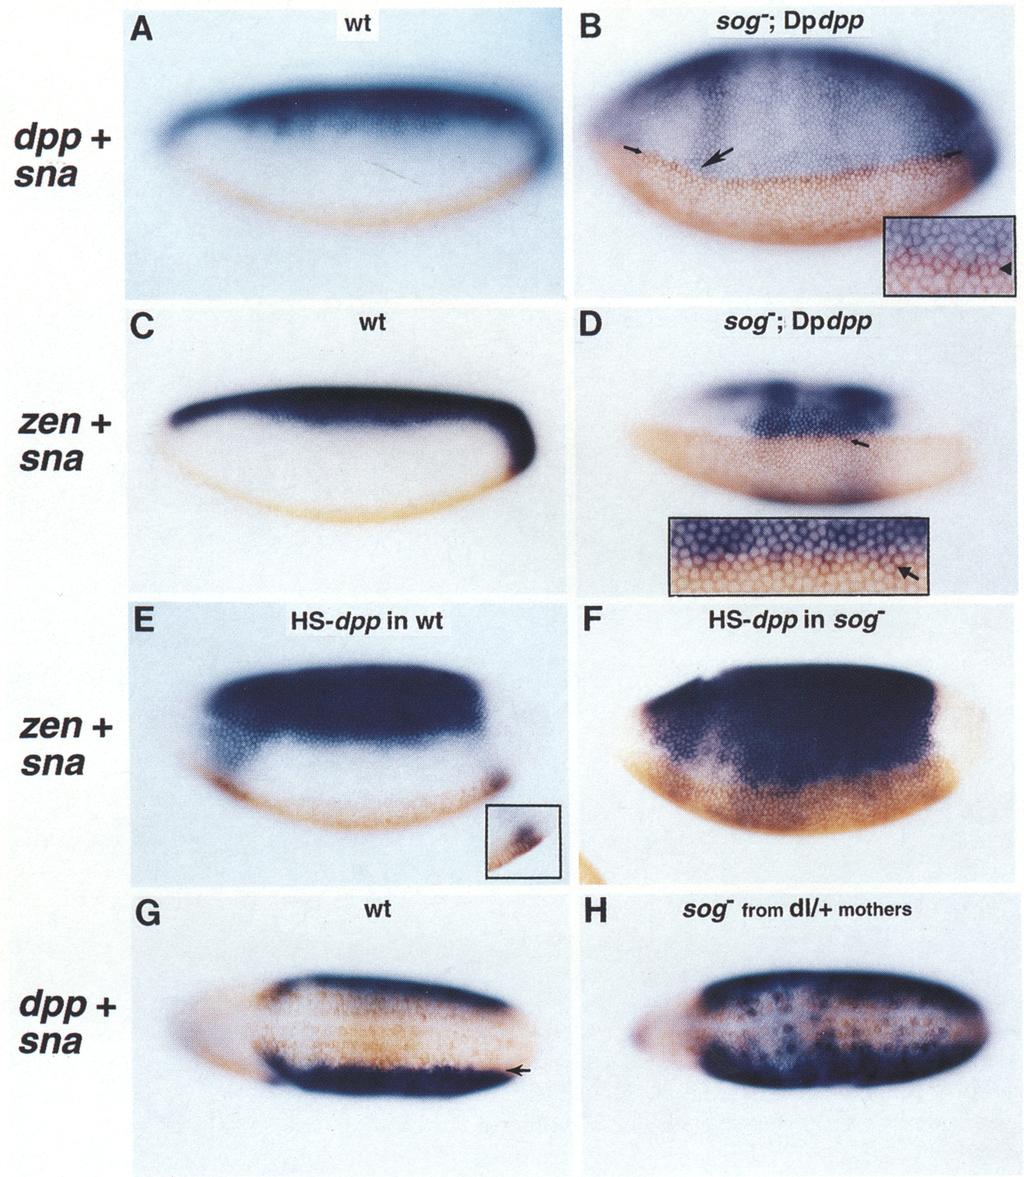 Biehs et al. Figure 3. sog opposes Dpp autoactivation in the neuroectoderm. Expression of the early dorsal markers dpp (A, B, G, H} and zen (C-F) in the neuroectoderm is opposed by sog.